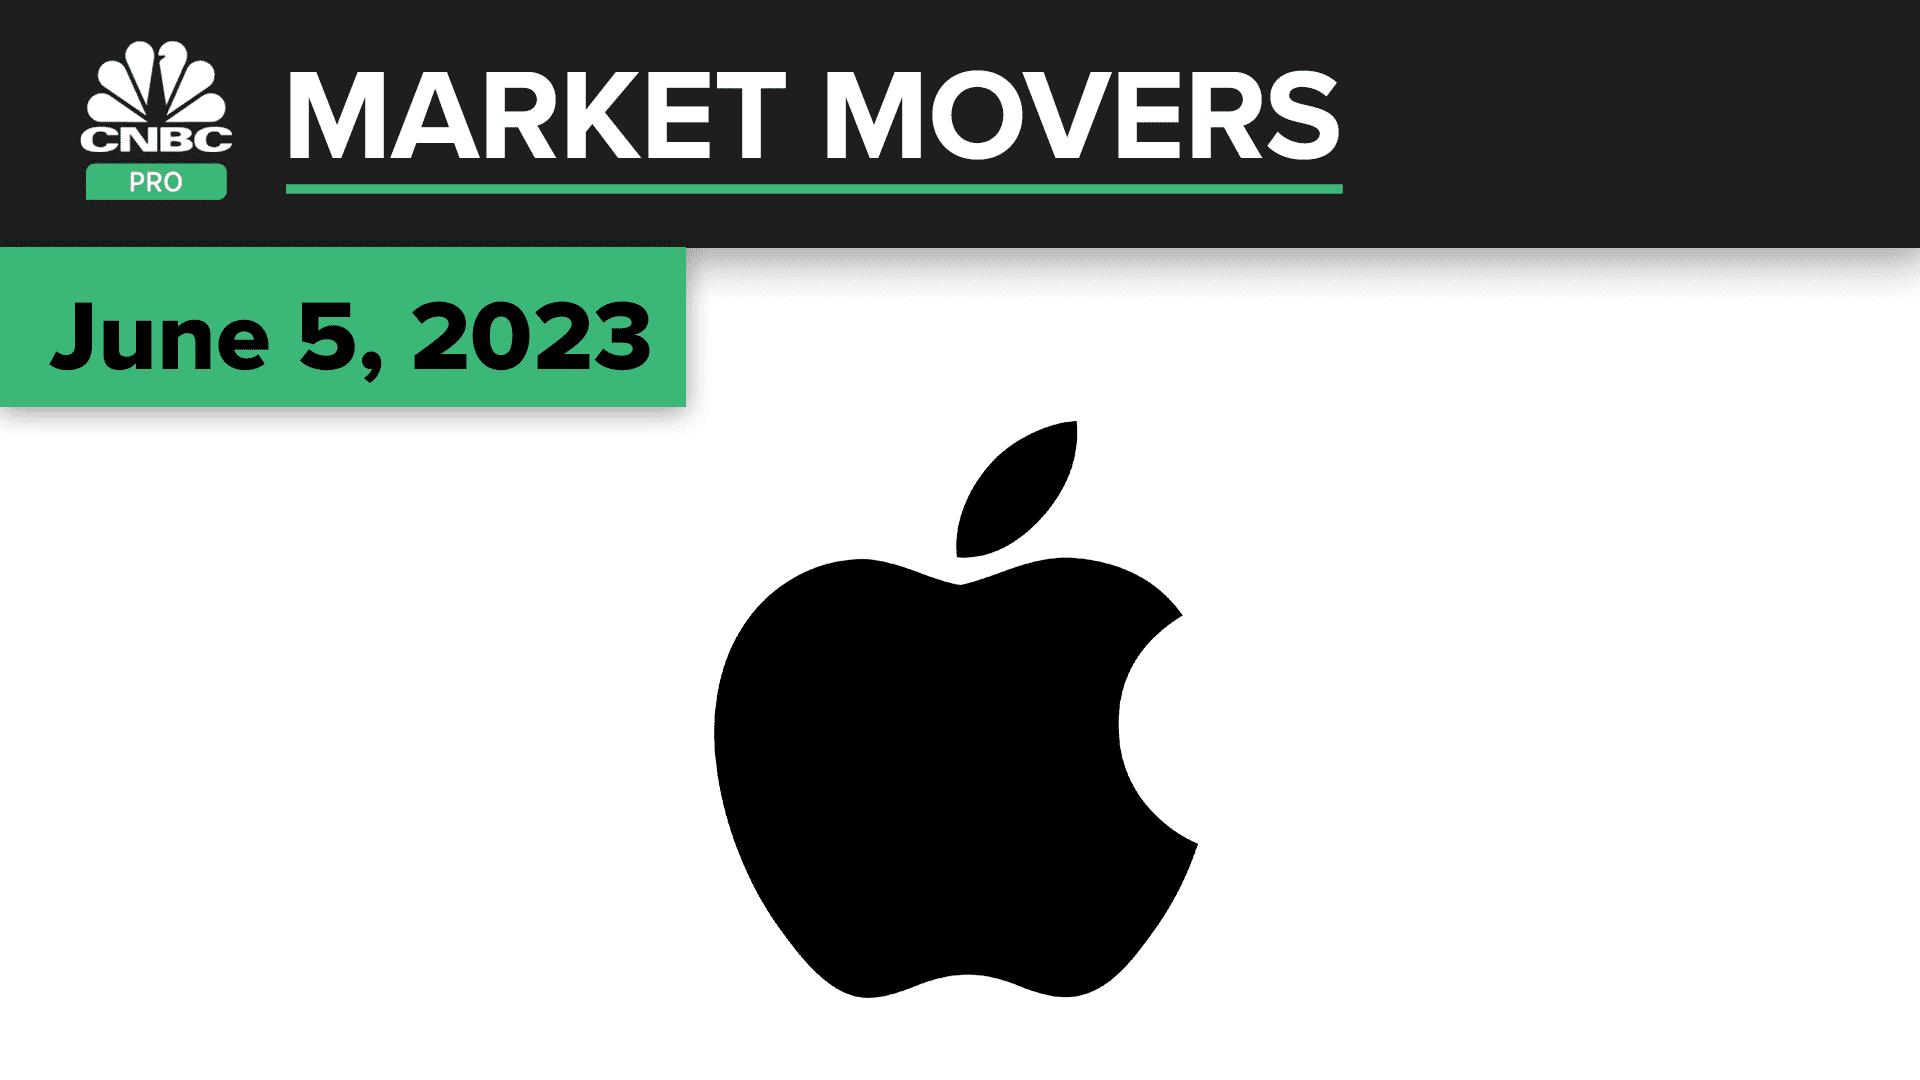 Apple hits all-time high and announces new products. Here's how to play the stock